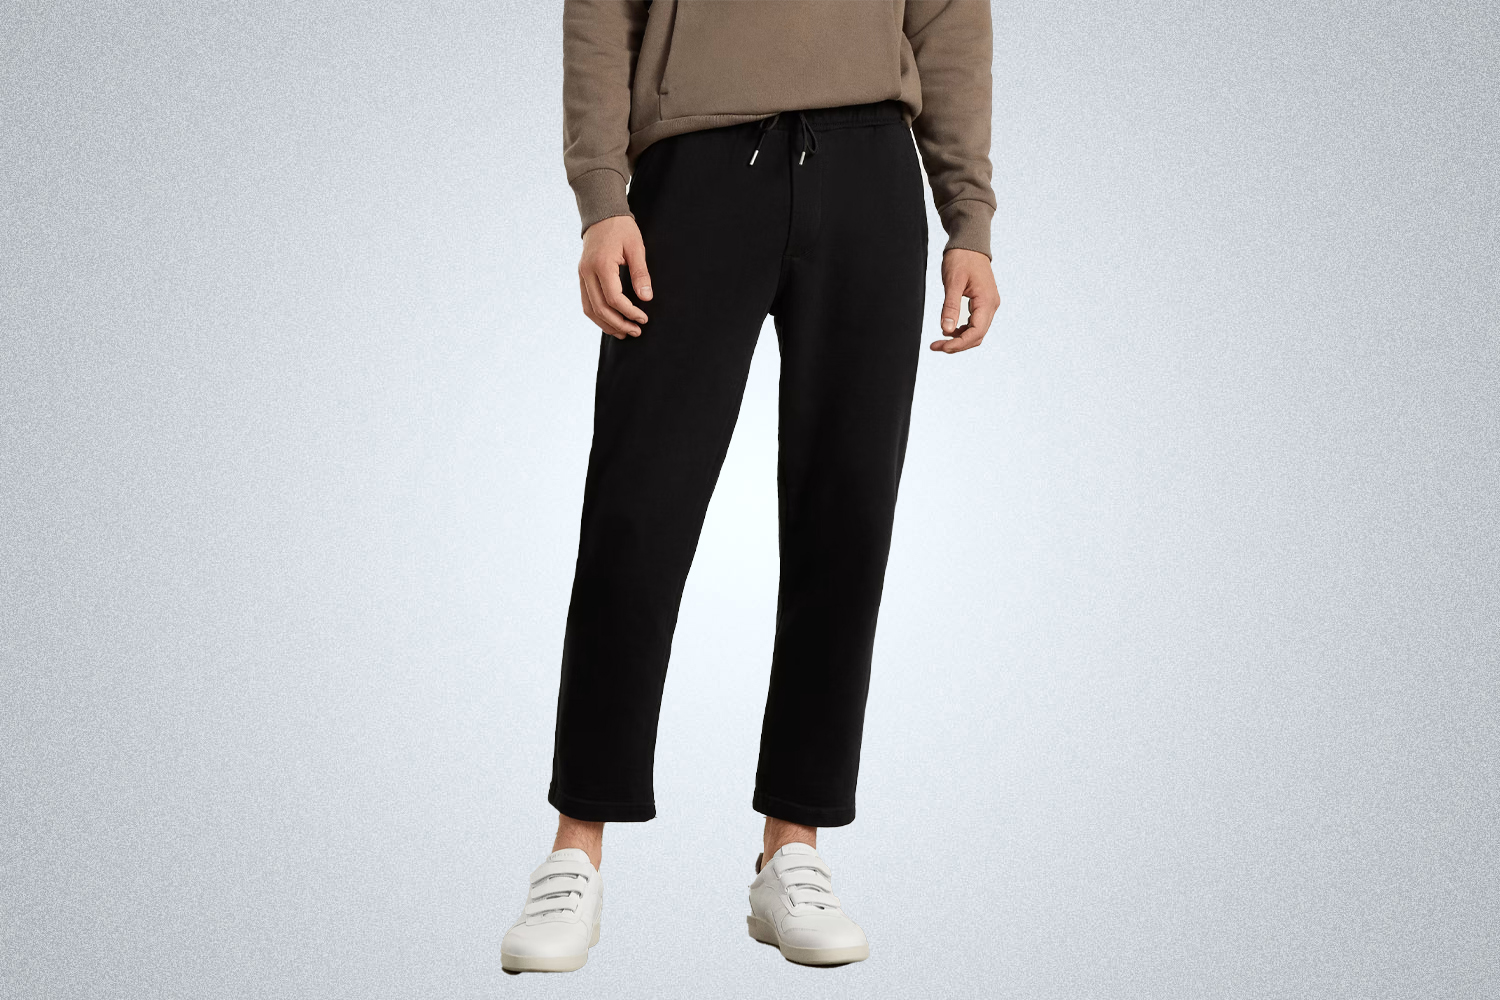 The Organic French Terry Sweatpant